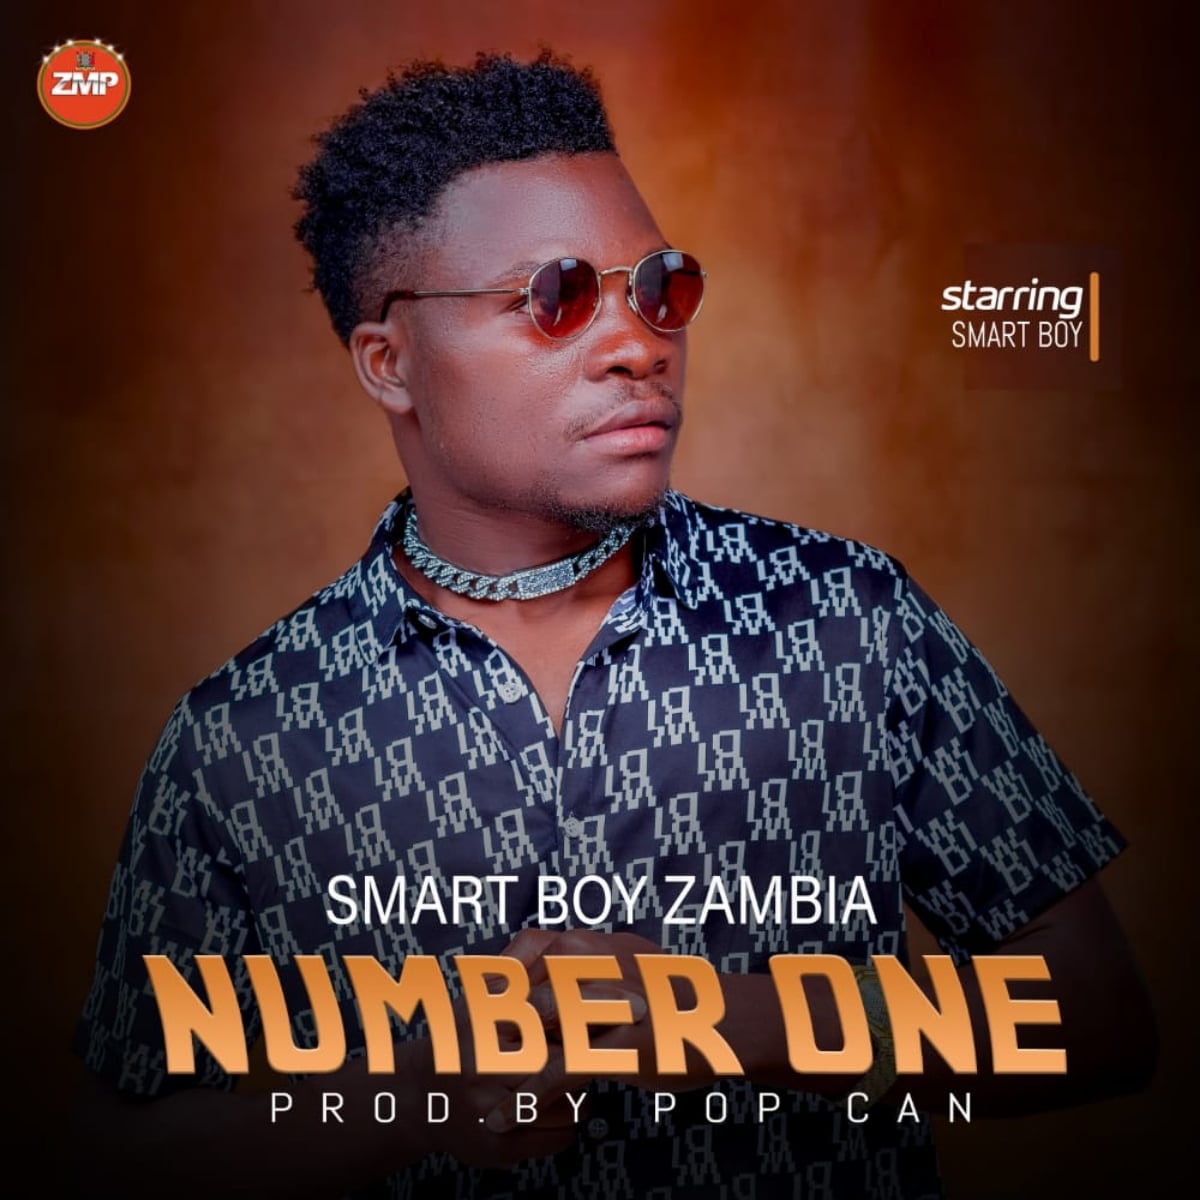 DOWNLOAD: Smart Boy Zambia – “Number One” Mp3